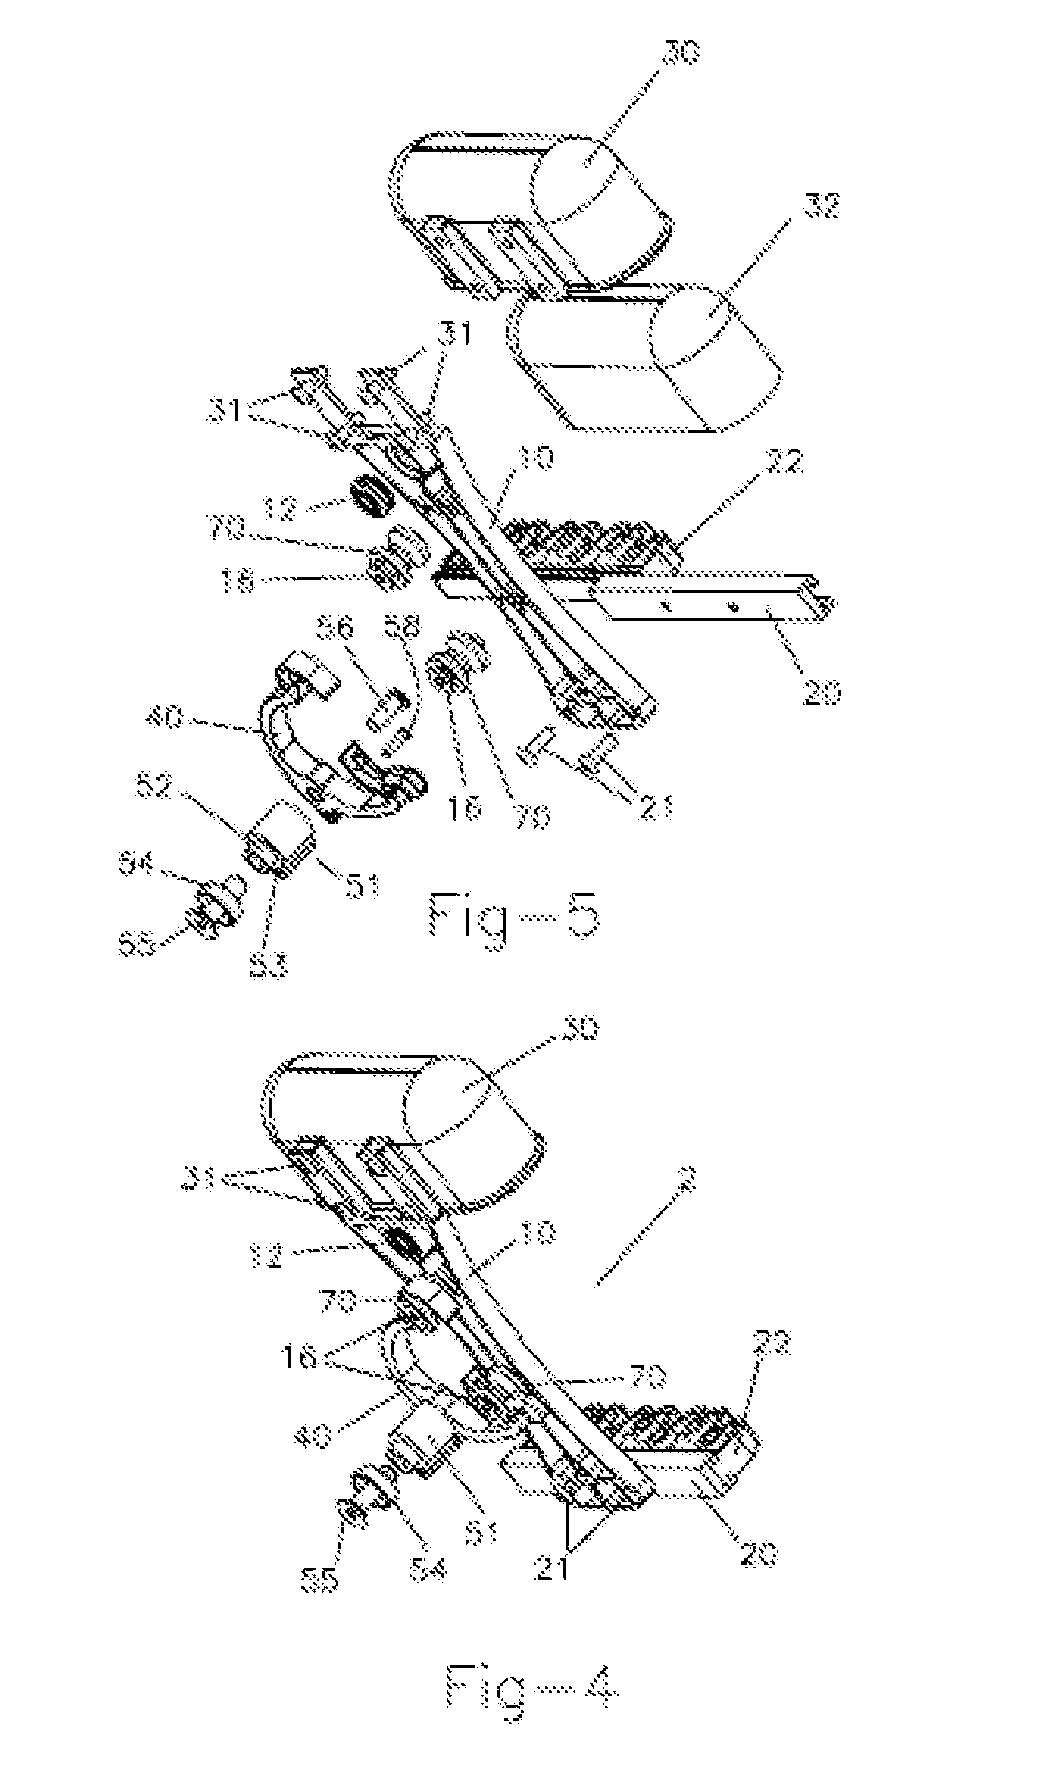 Apparatus And Method For Releasably Mounting An Accessory To An Object Such As For Releasably Mounting An Arrow Quiver To An Archery Bow